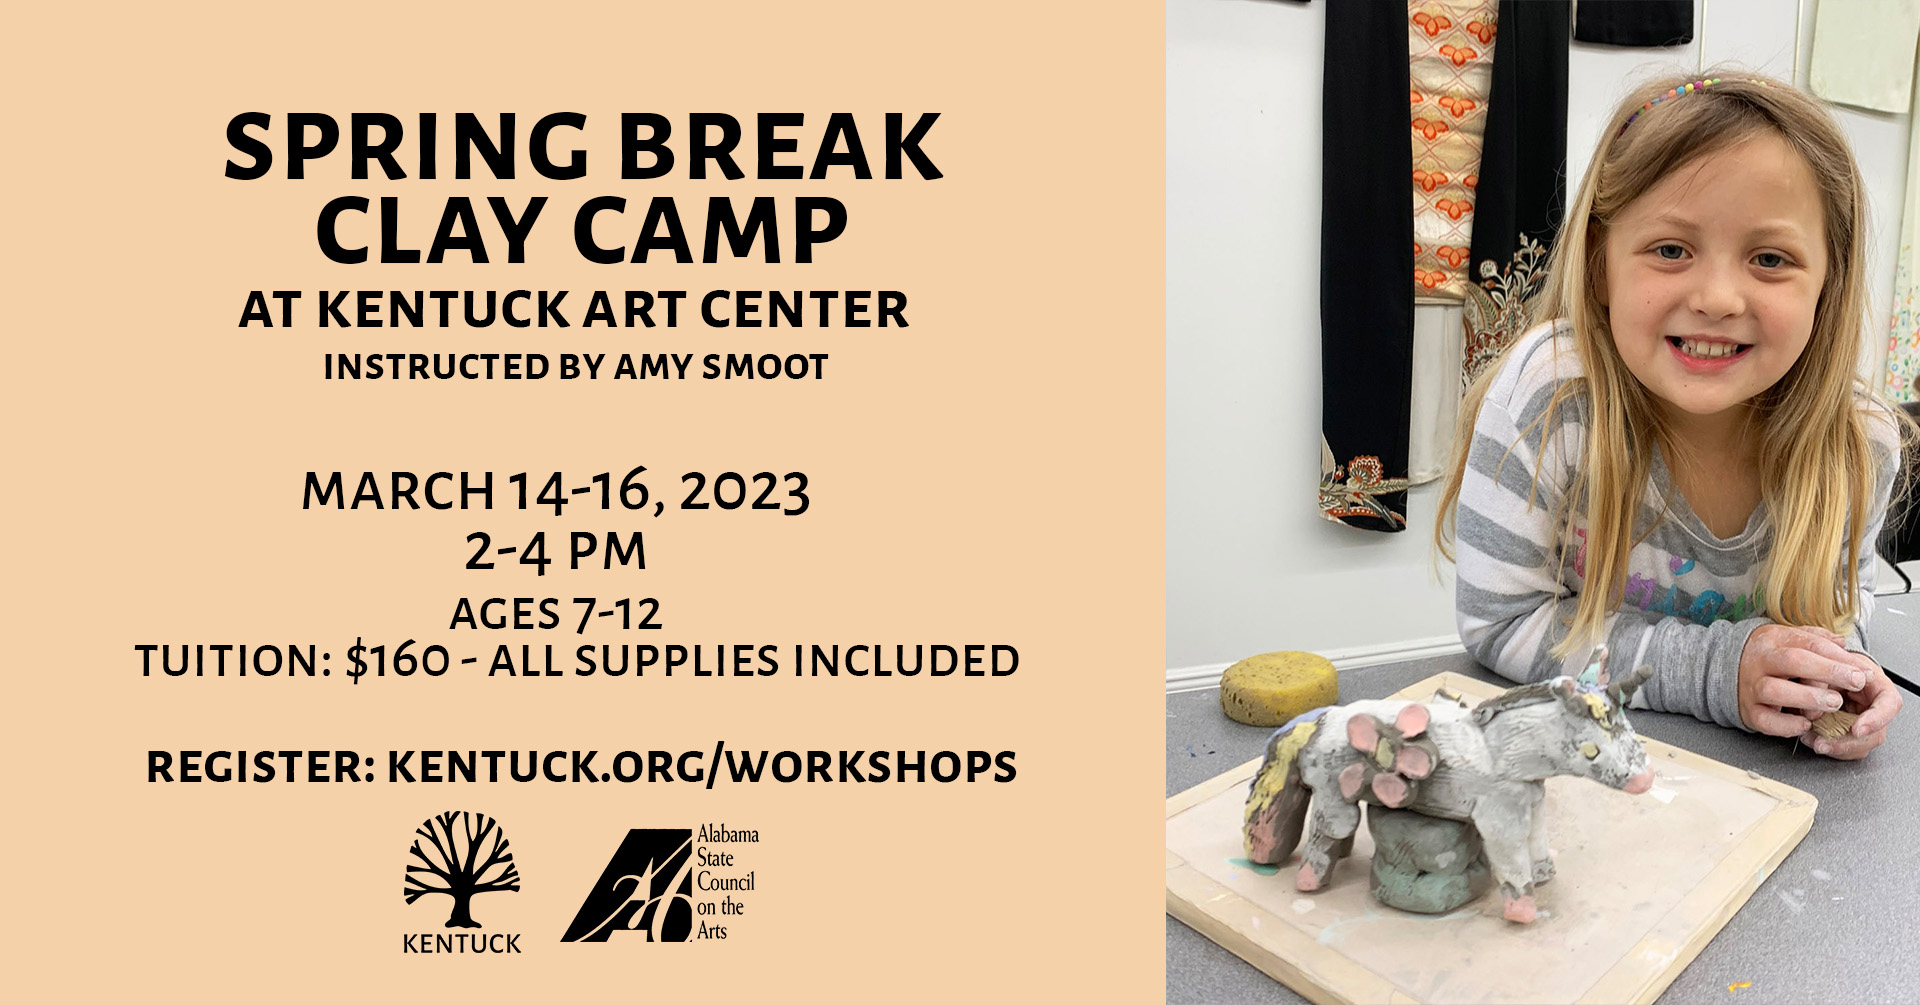 Spring Break Clay Camp 2023 with Amy Smoot